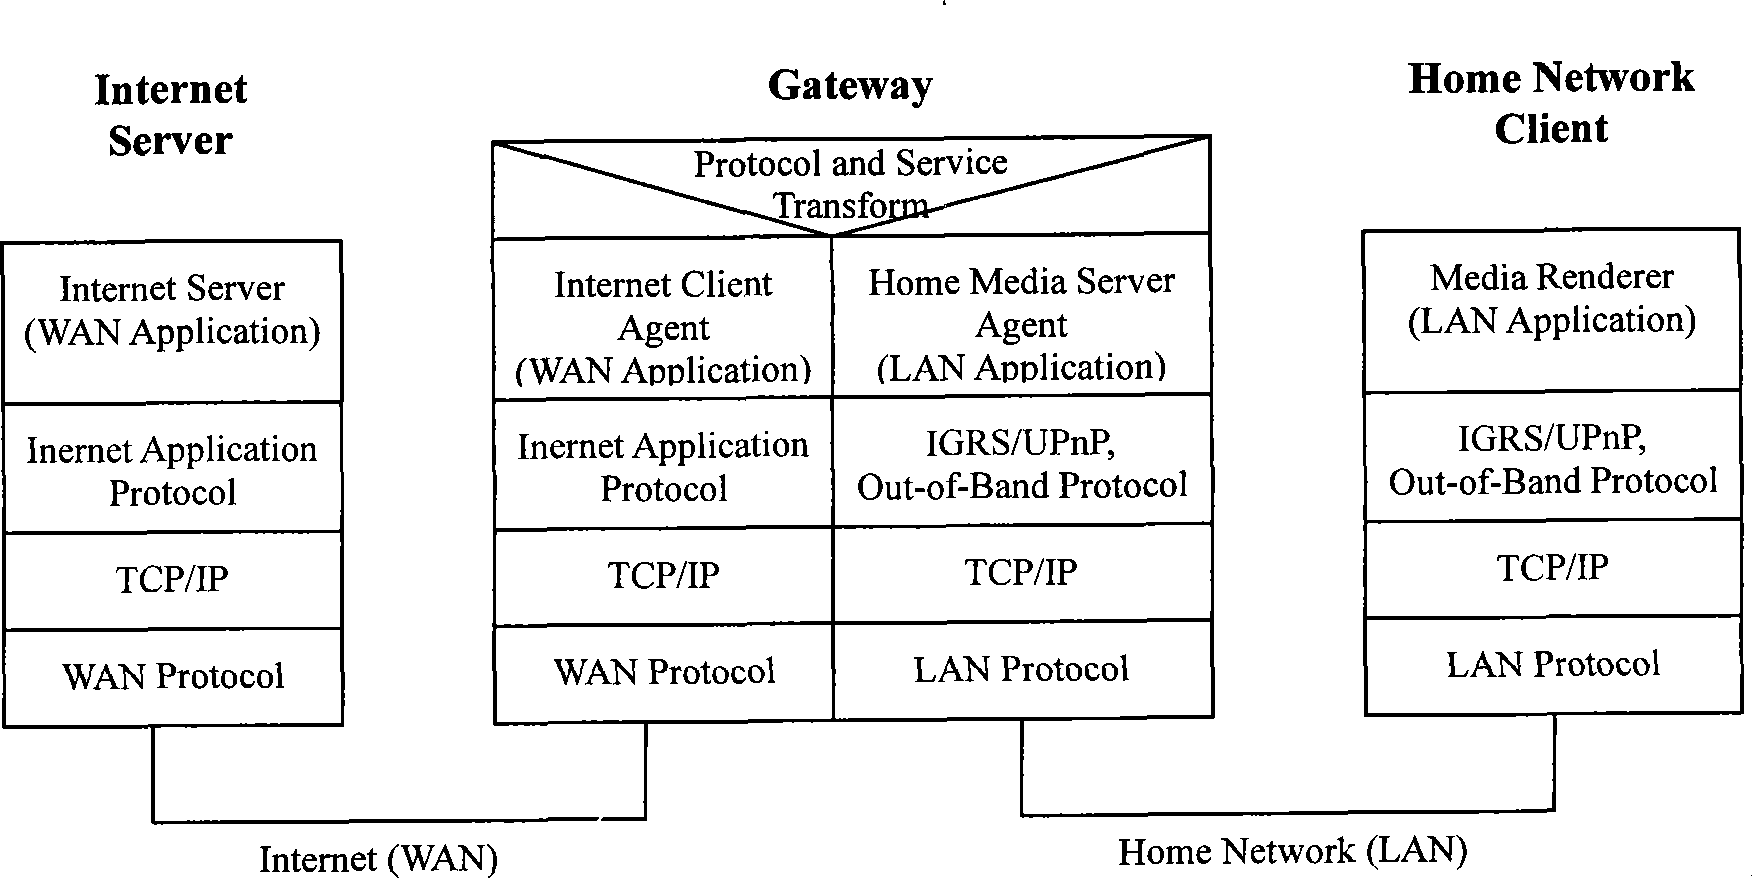 Internet business gateway for digital household network and audio/video program request method